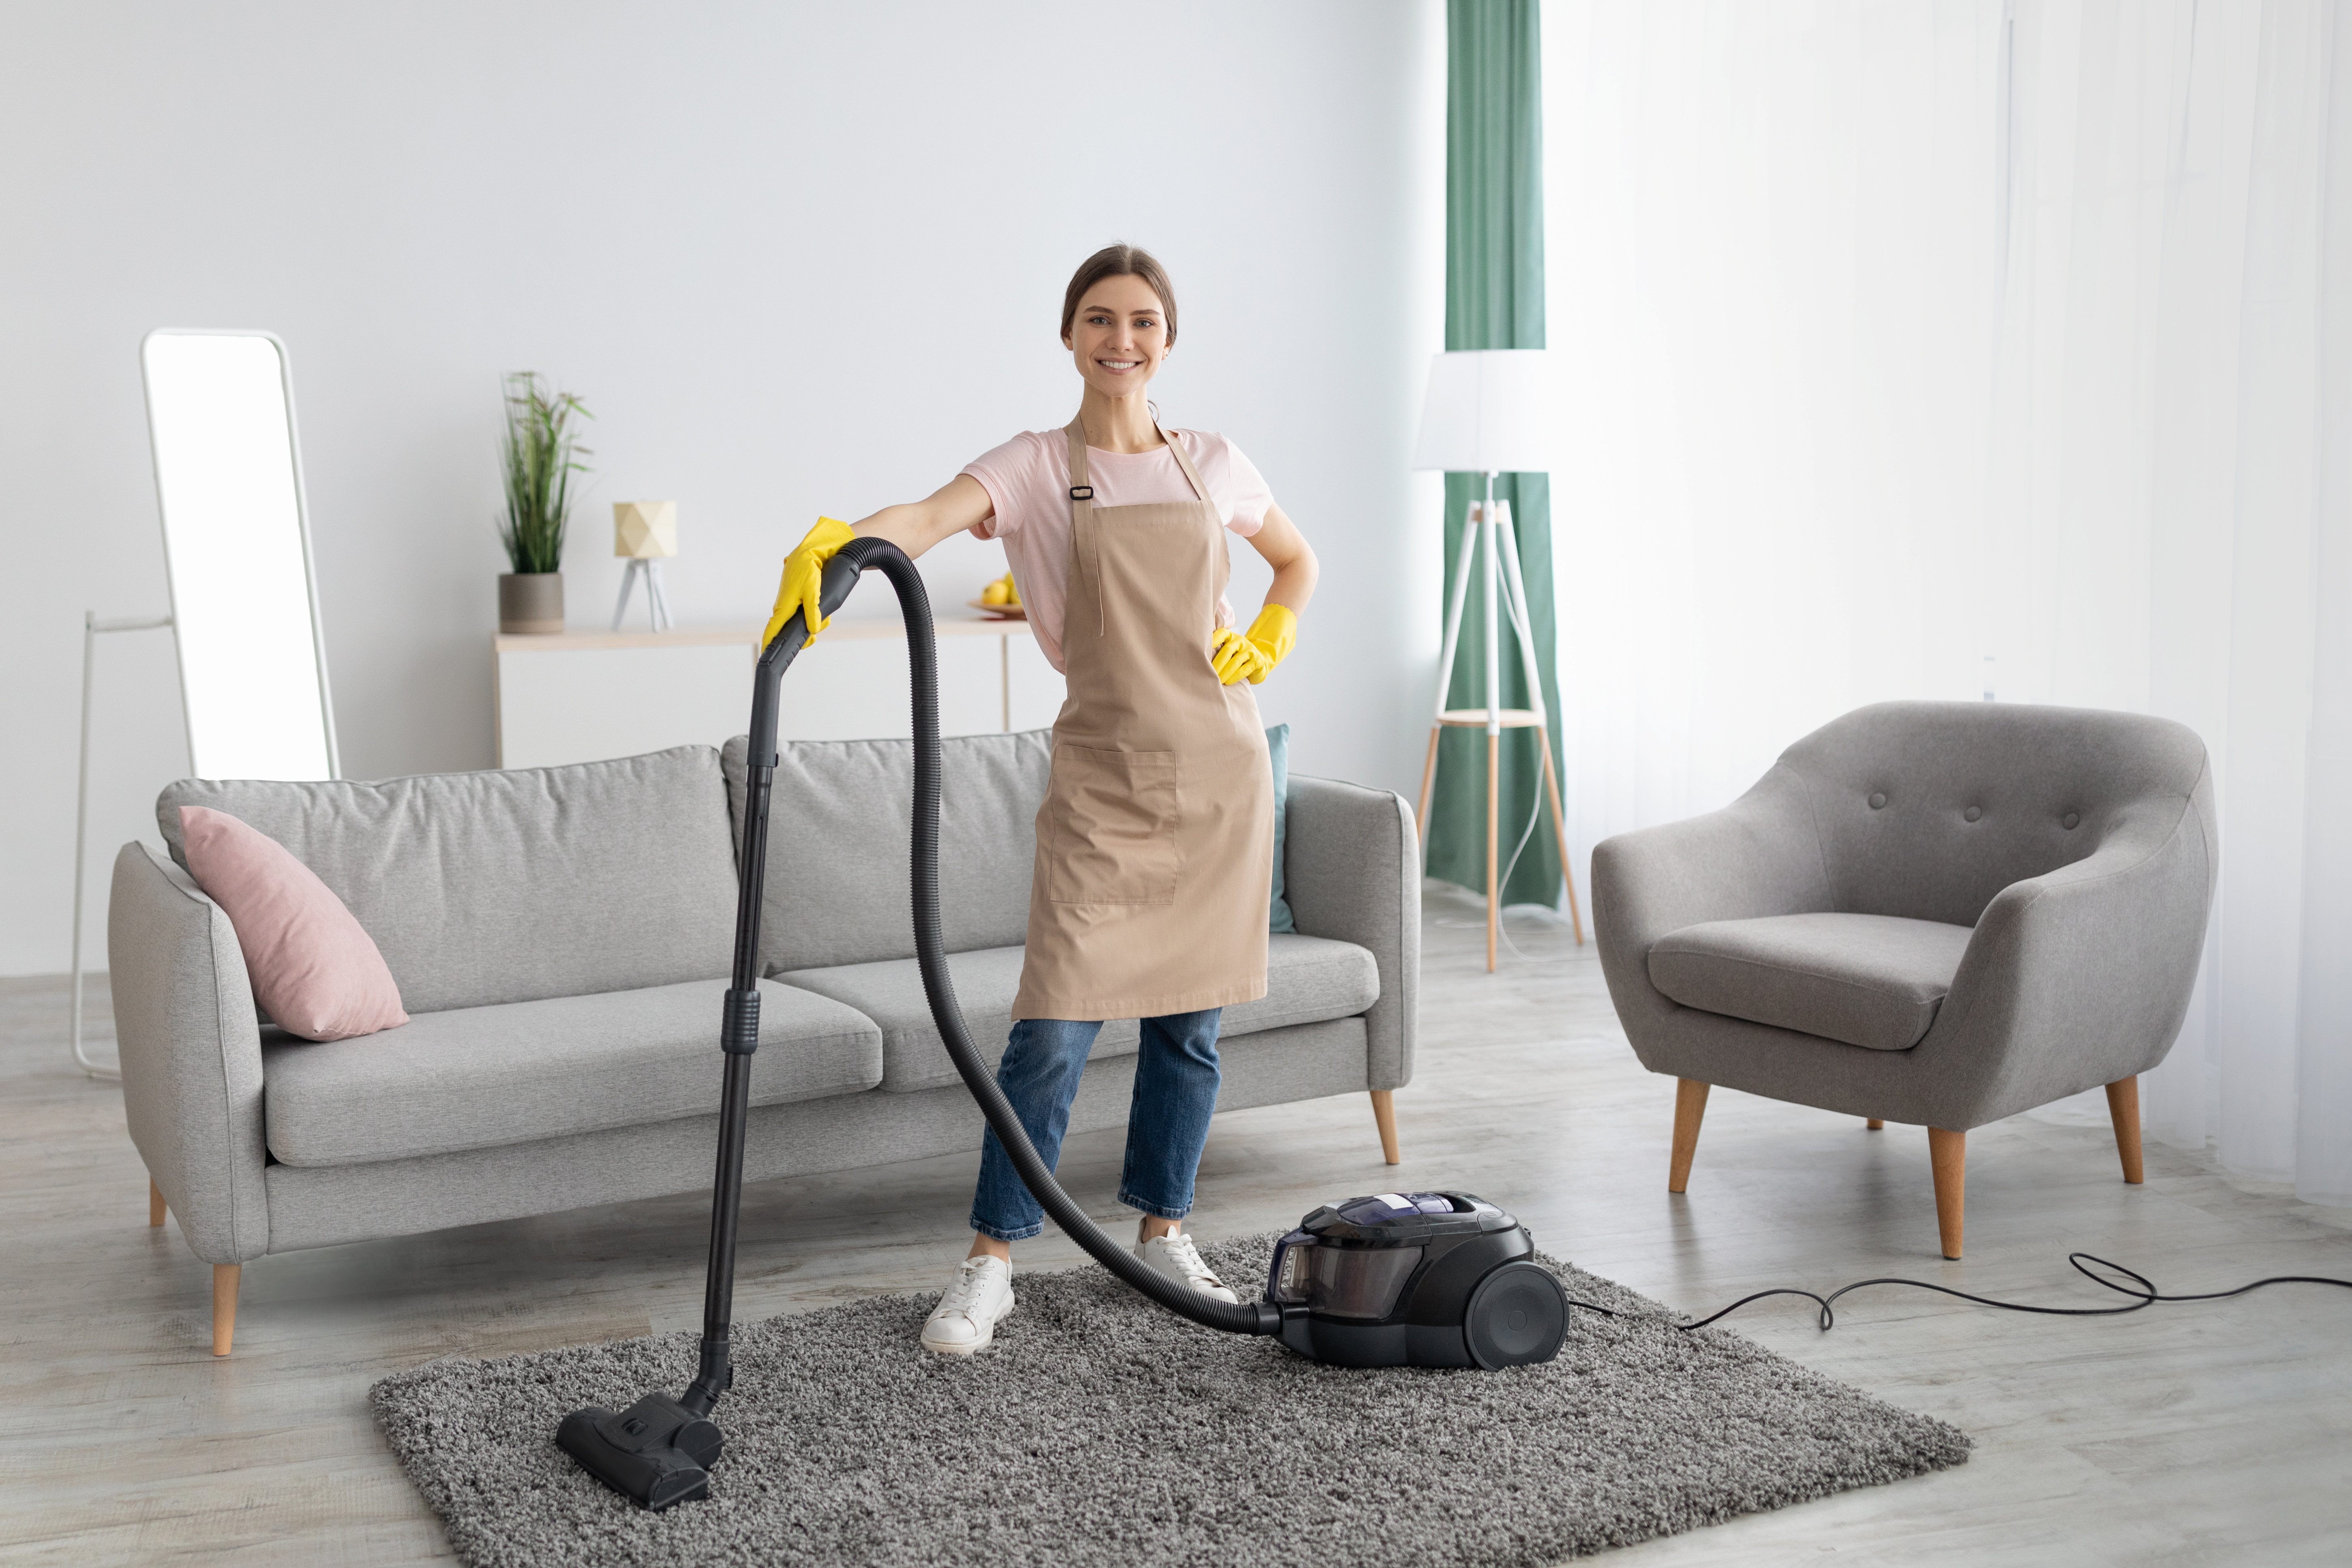 Professional cleaning service. Positive young lady in apron and rubber gloves vacuuming living room of modern house